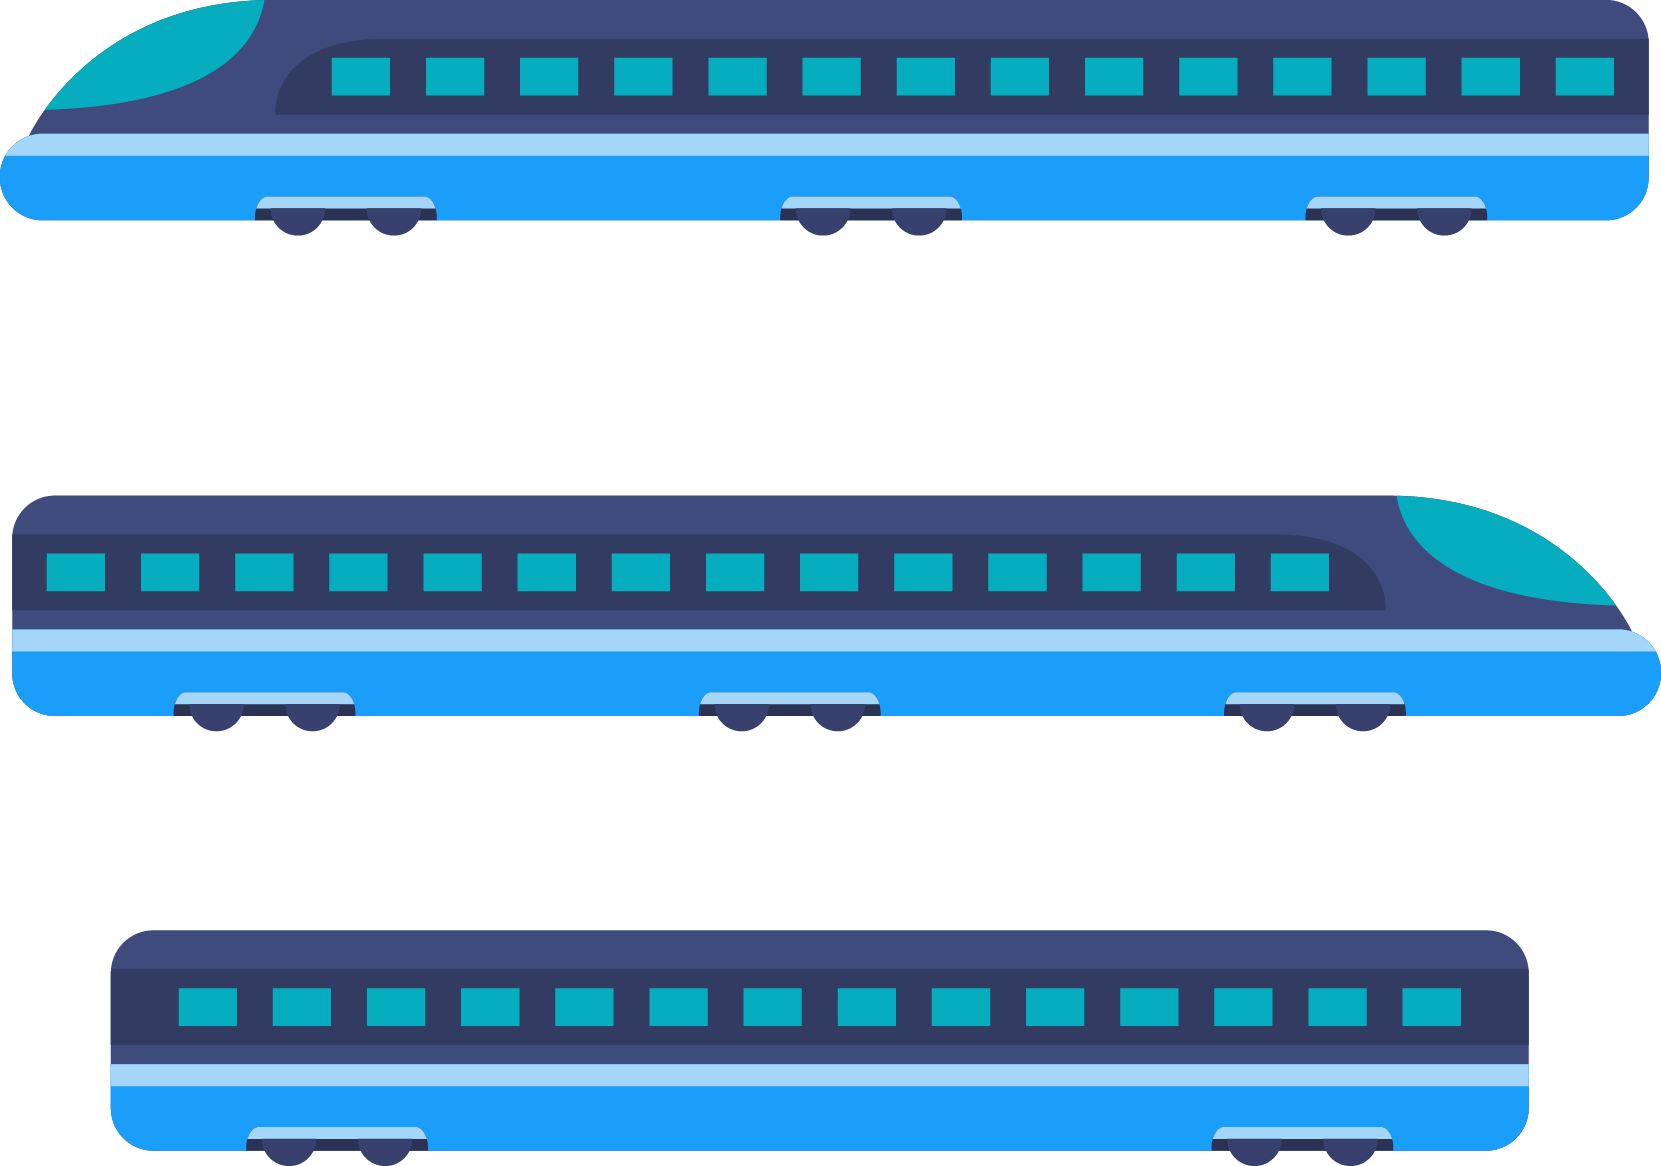 The best free Transport vector images. Download from 203 free vectors ...